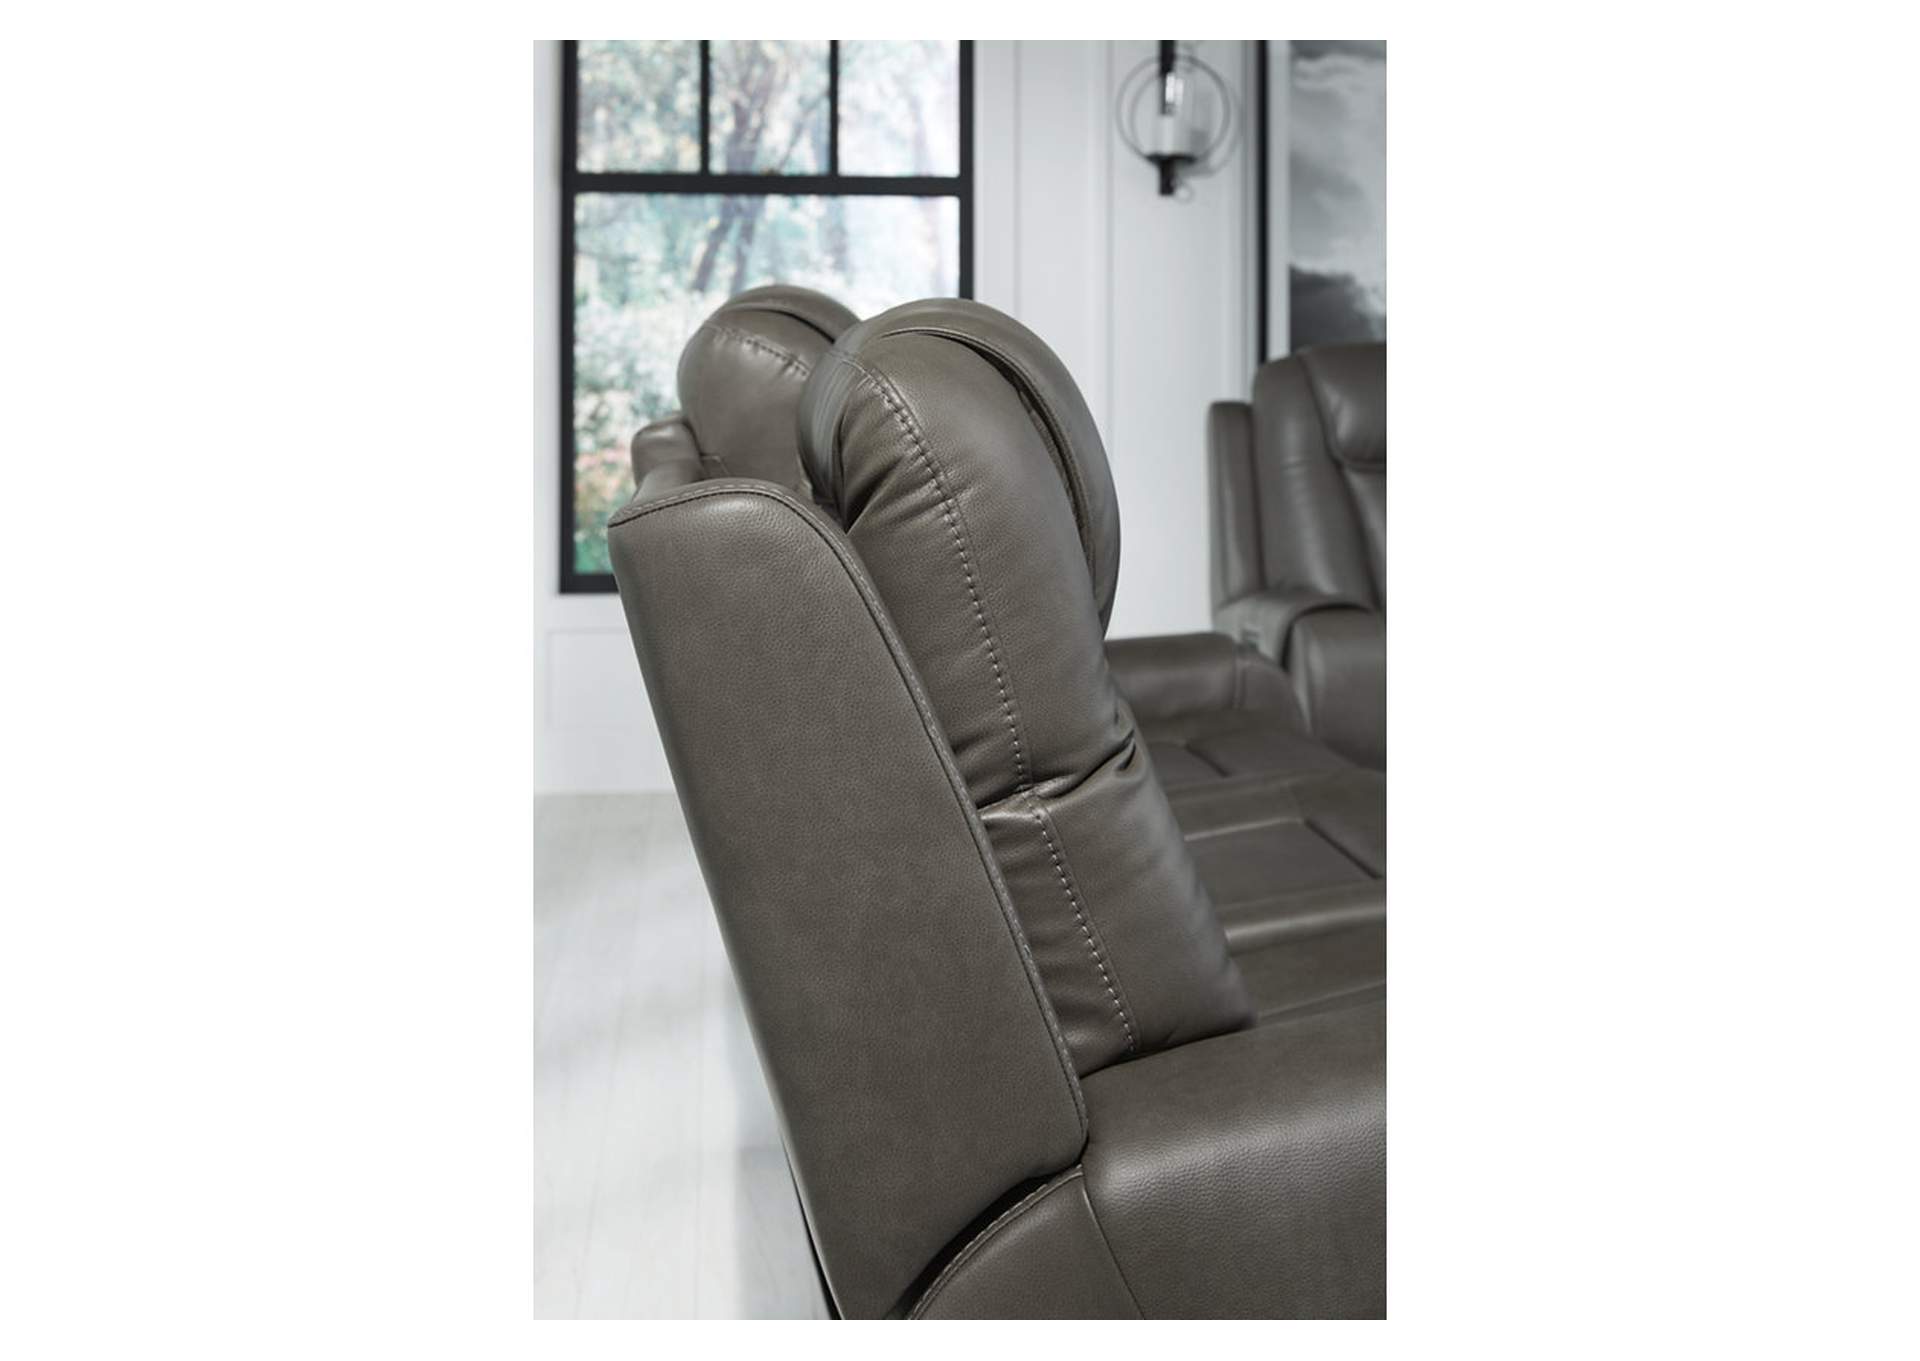 Card Player Power Reclining Sofa,Signature Design By Ashley